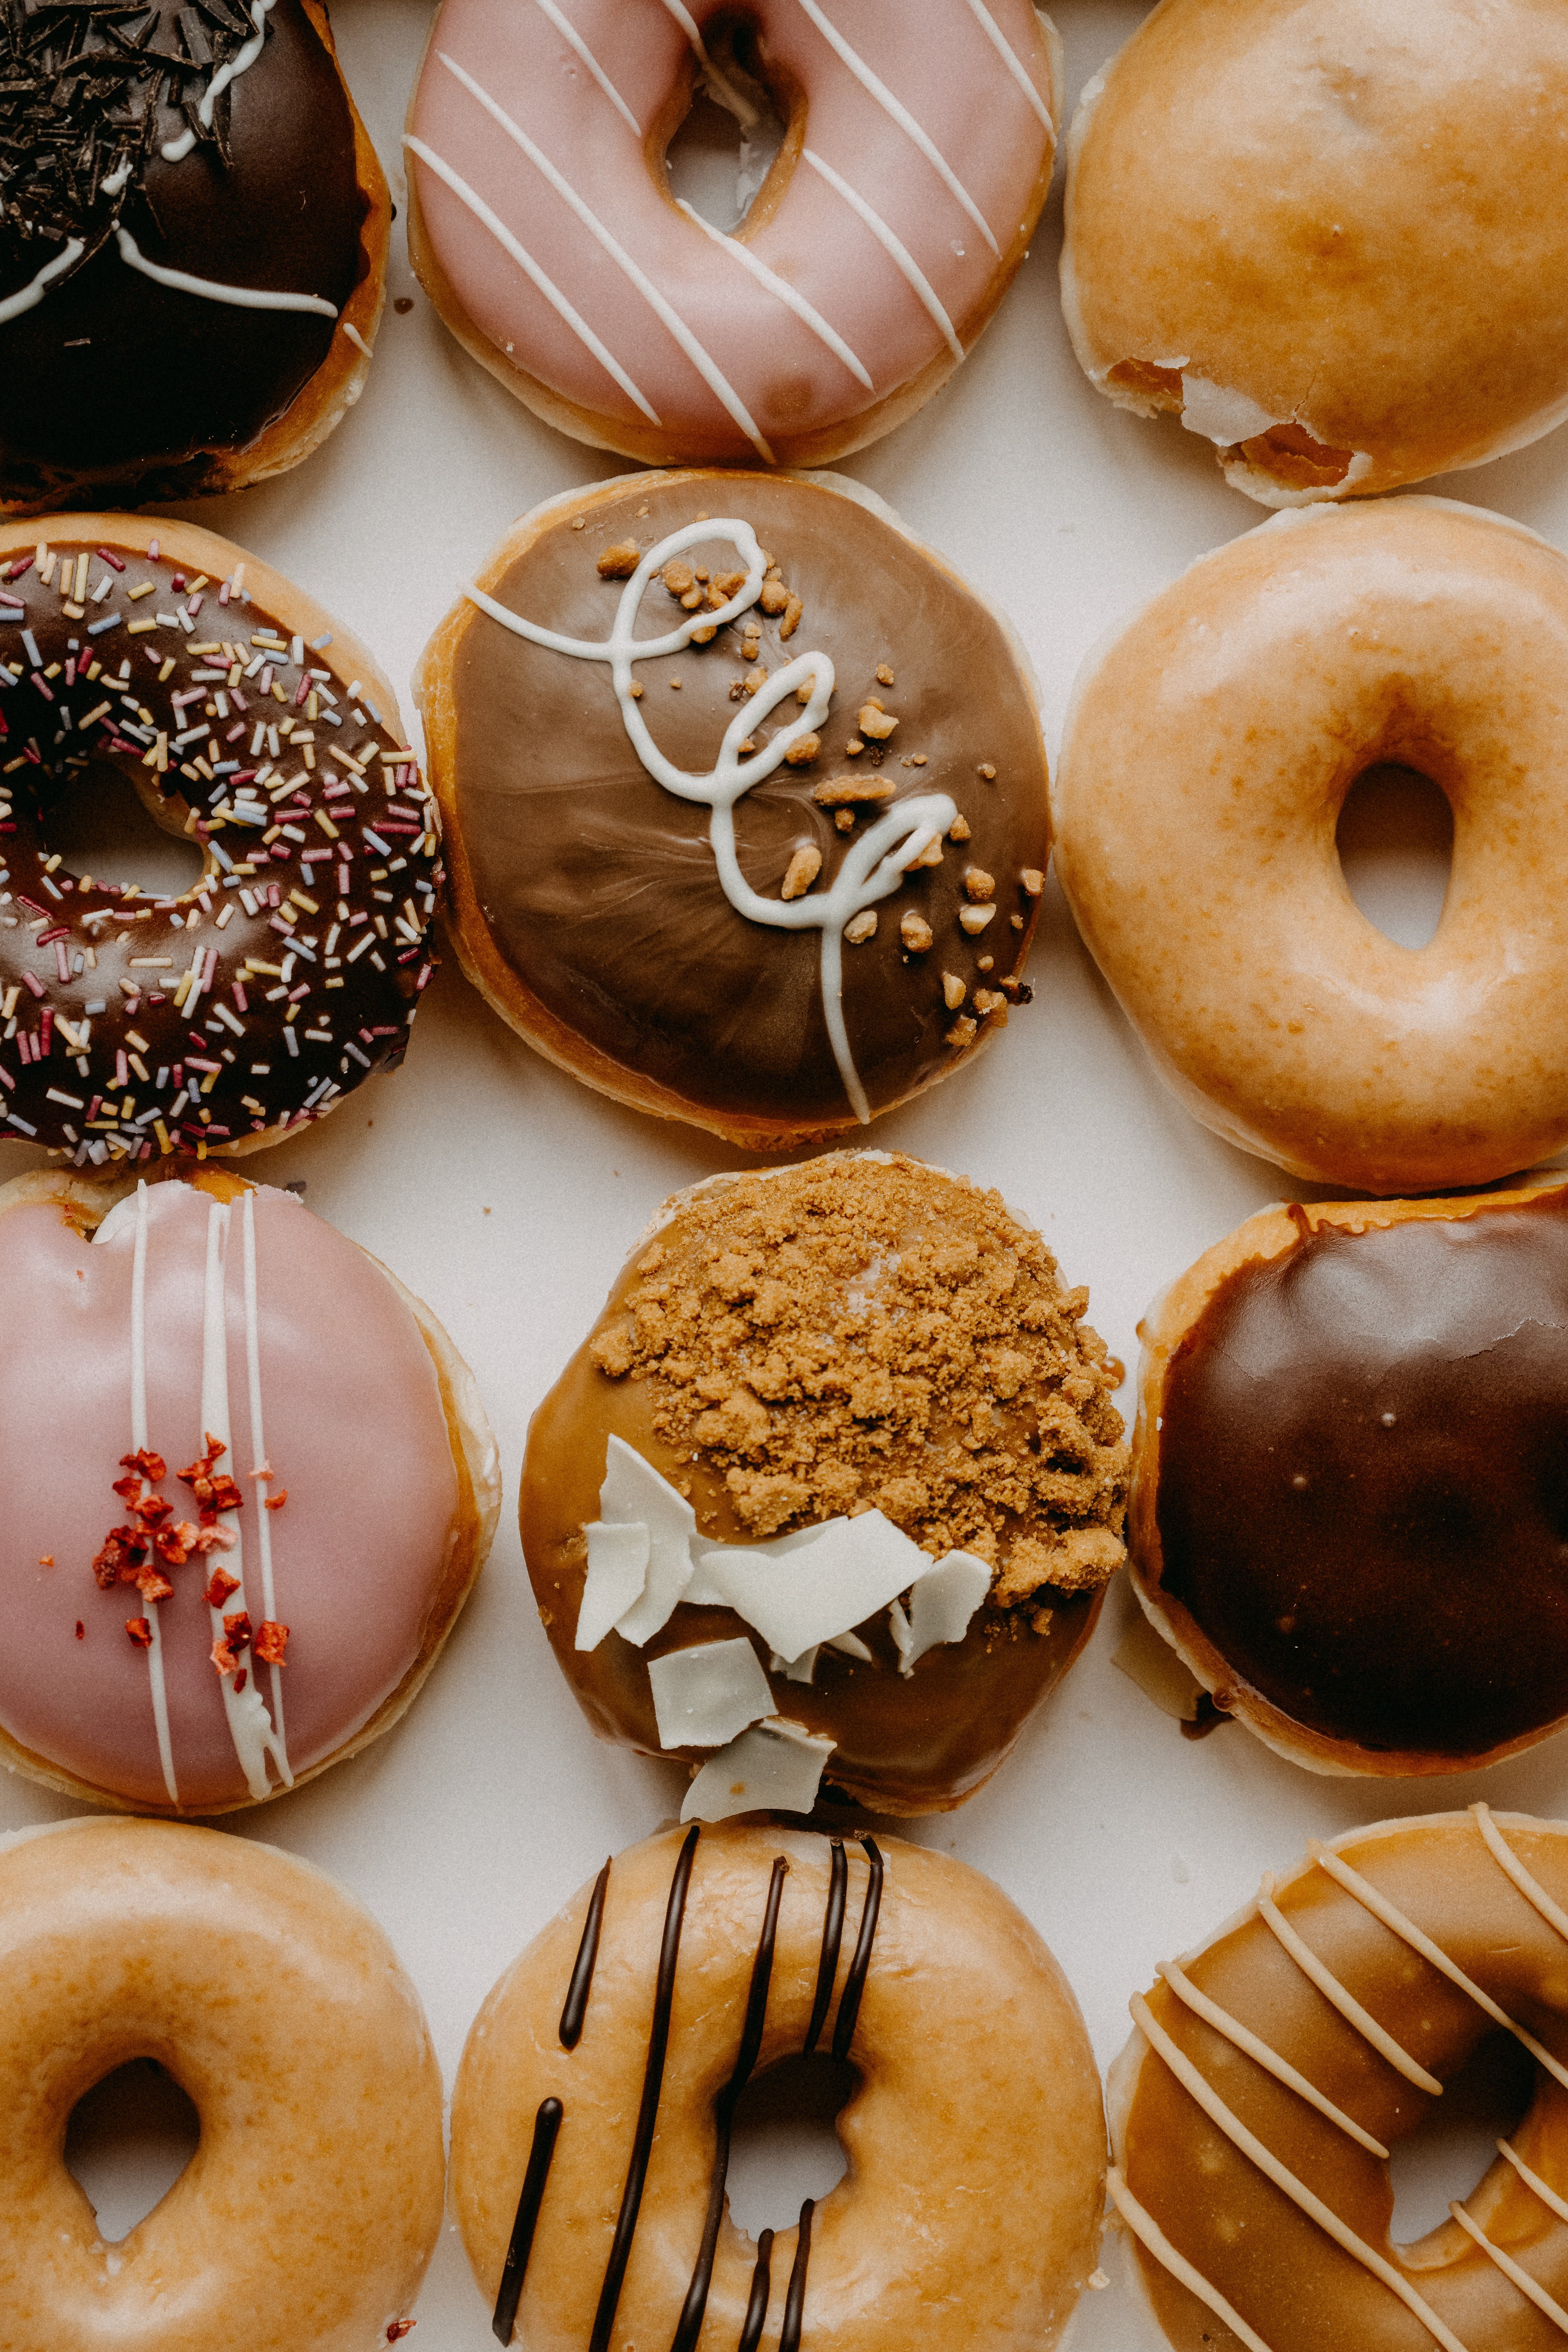 The participant was supposed to eat 5 doughnuts if he got the wrong answer. | Source: Unsplash